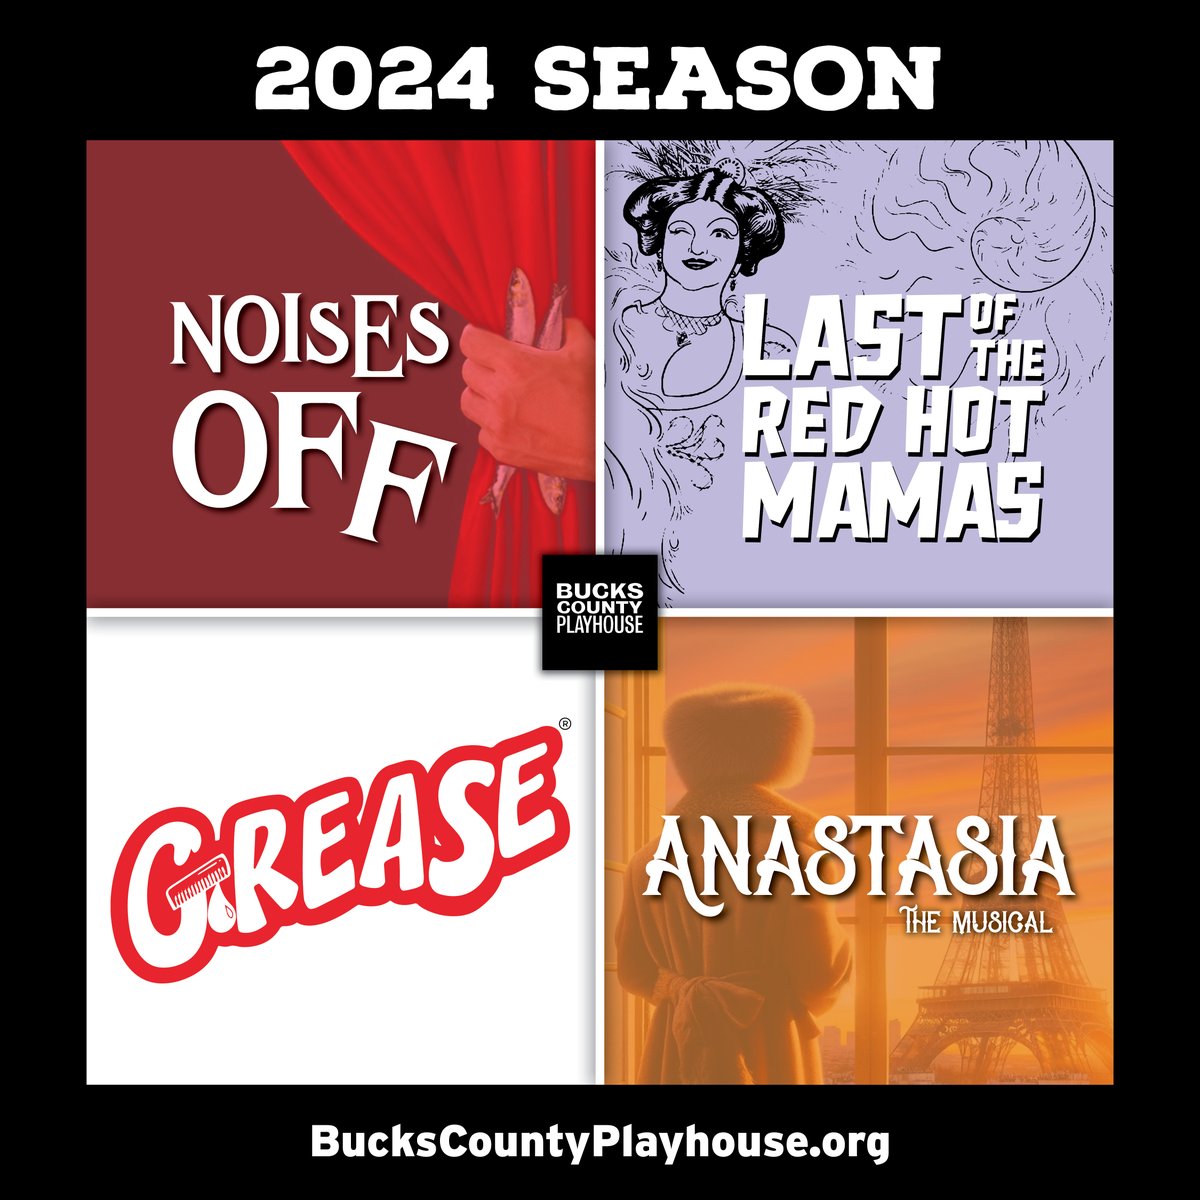 Single tickets for our 2024 Season are on sale now. BucksCountyPlayhouse.org